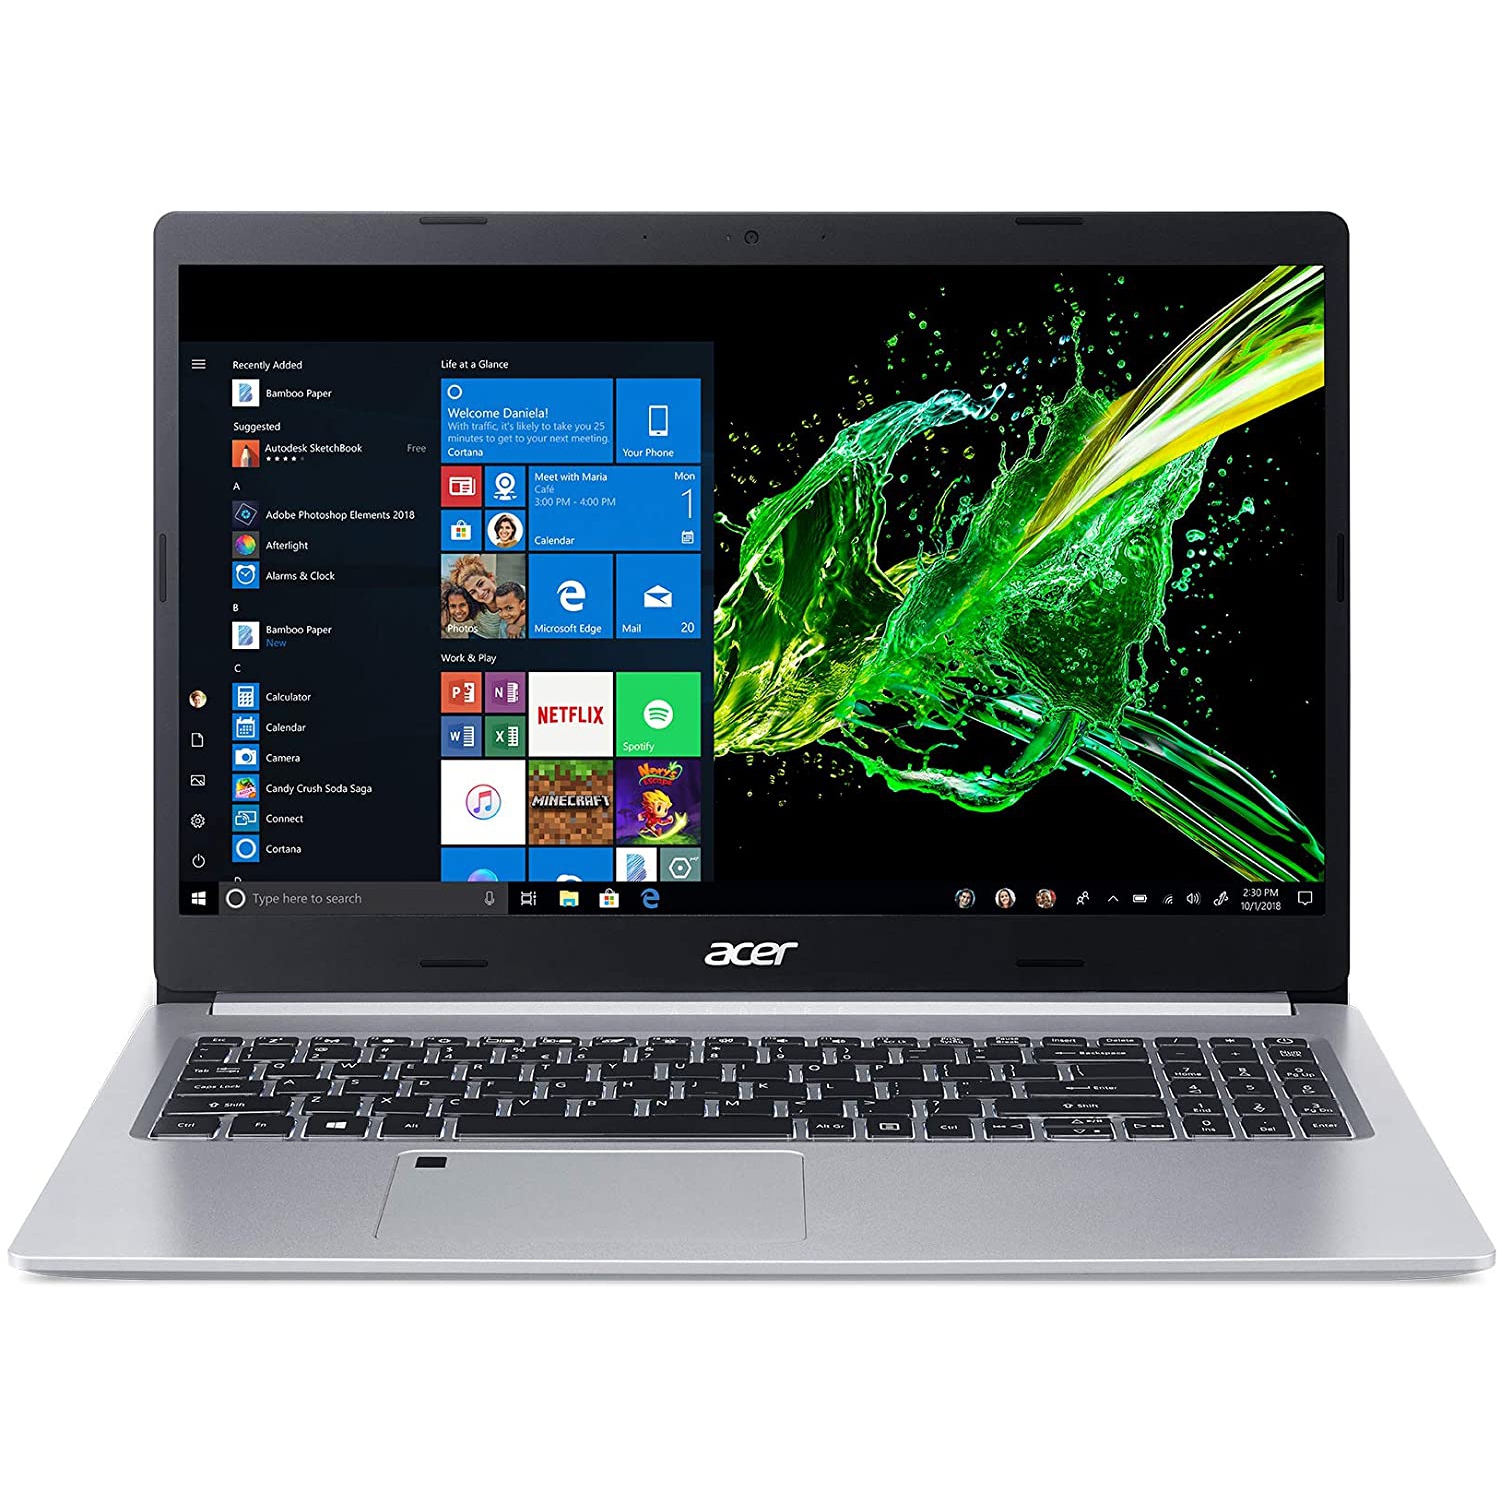 Refurbished (Excellent) - Acer 15.6" Aspire 5 Touch Screen Laptop (Intel i3-1115G4/8Gb/256Gb SSD/Win10 S) - Manufacturer ReCertified w/ 1 Year Warranty